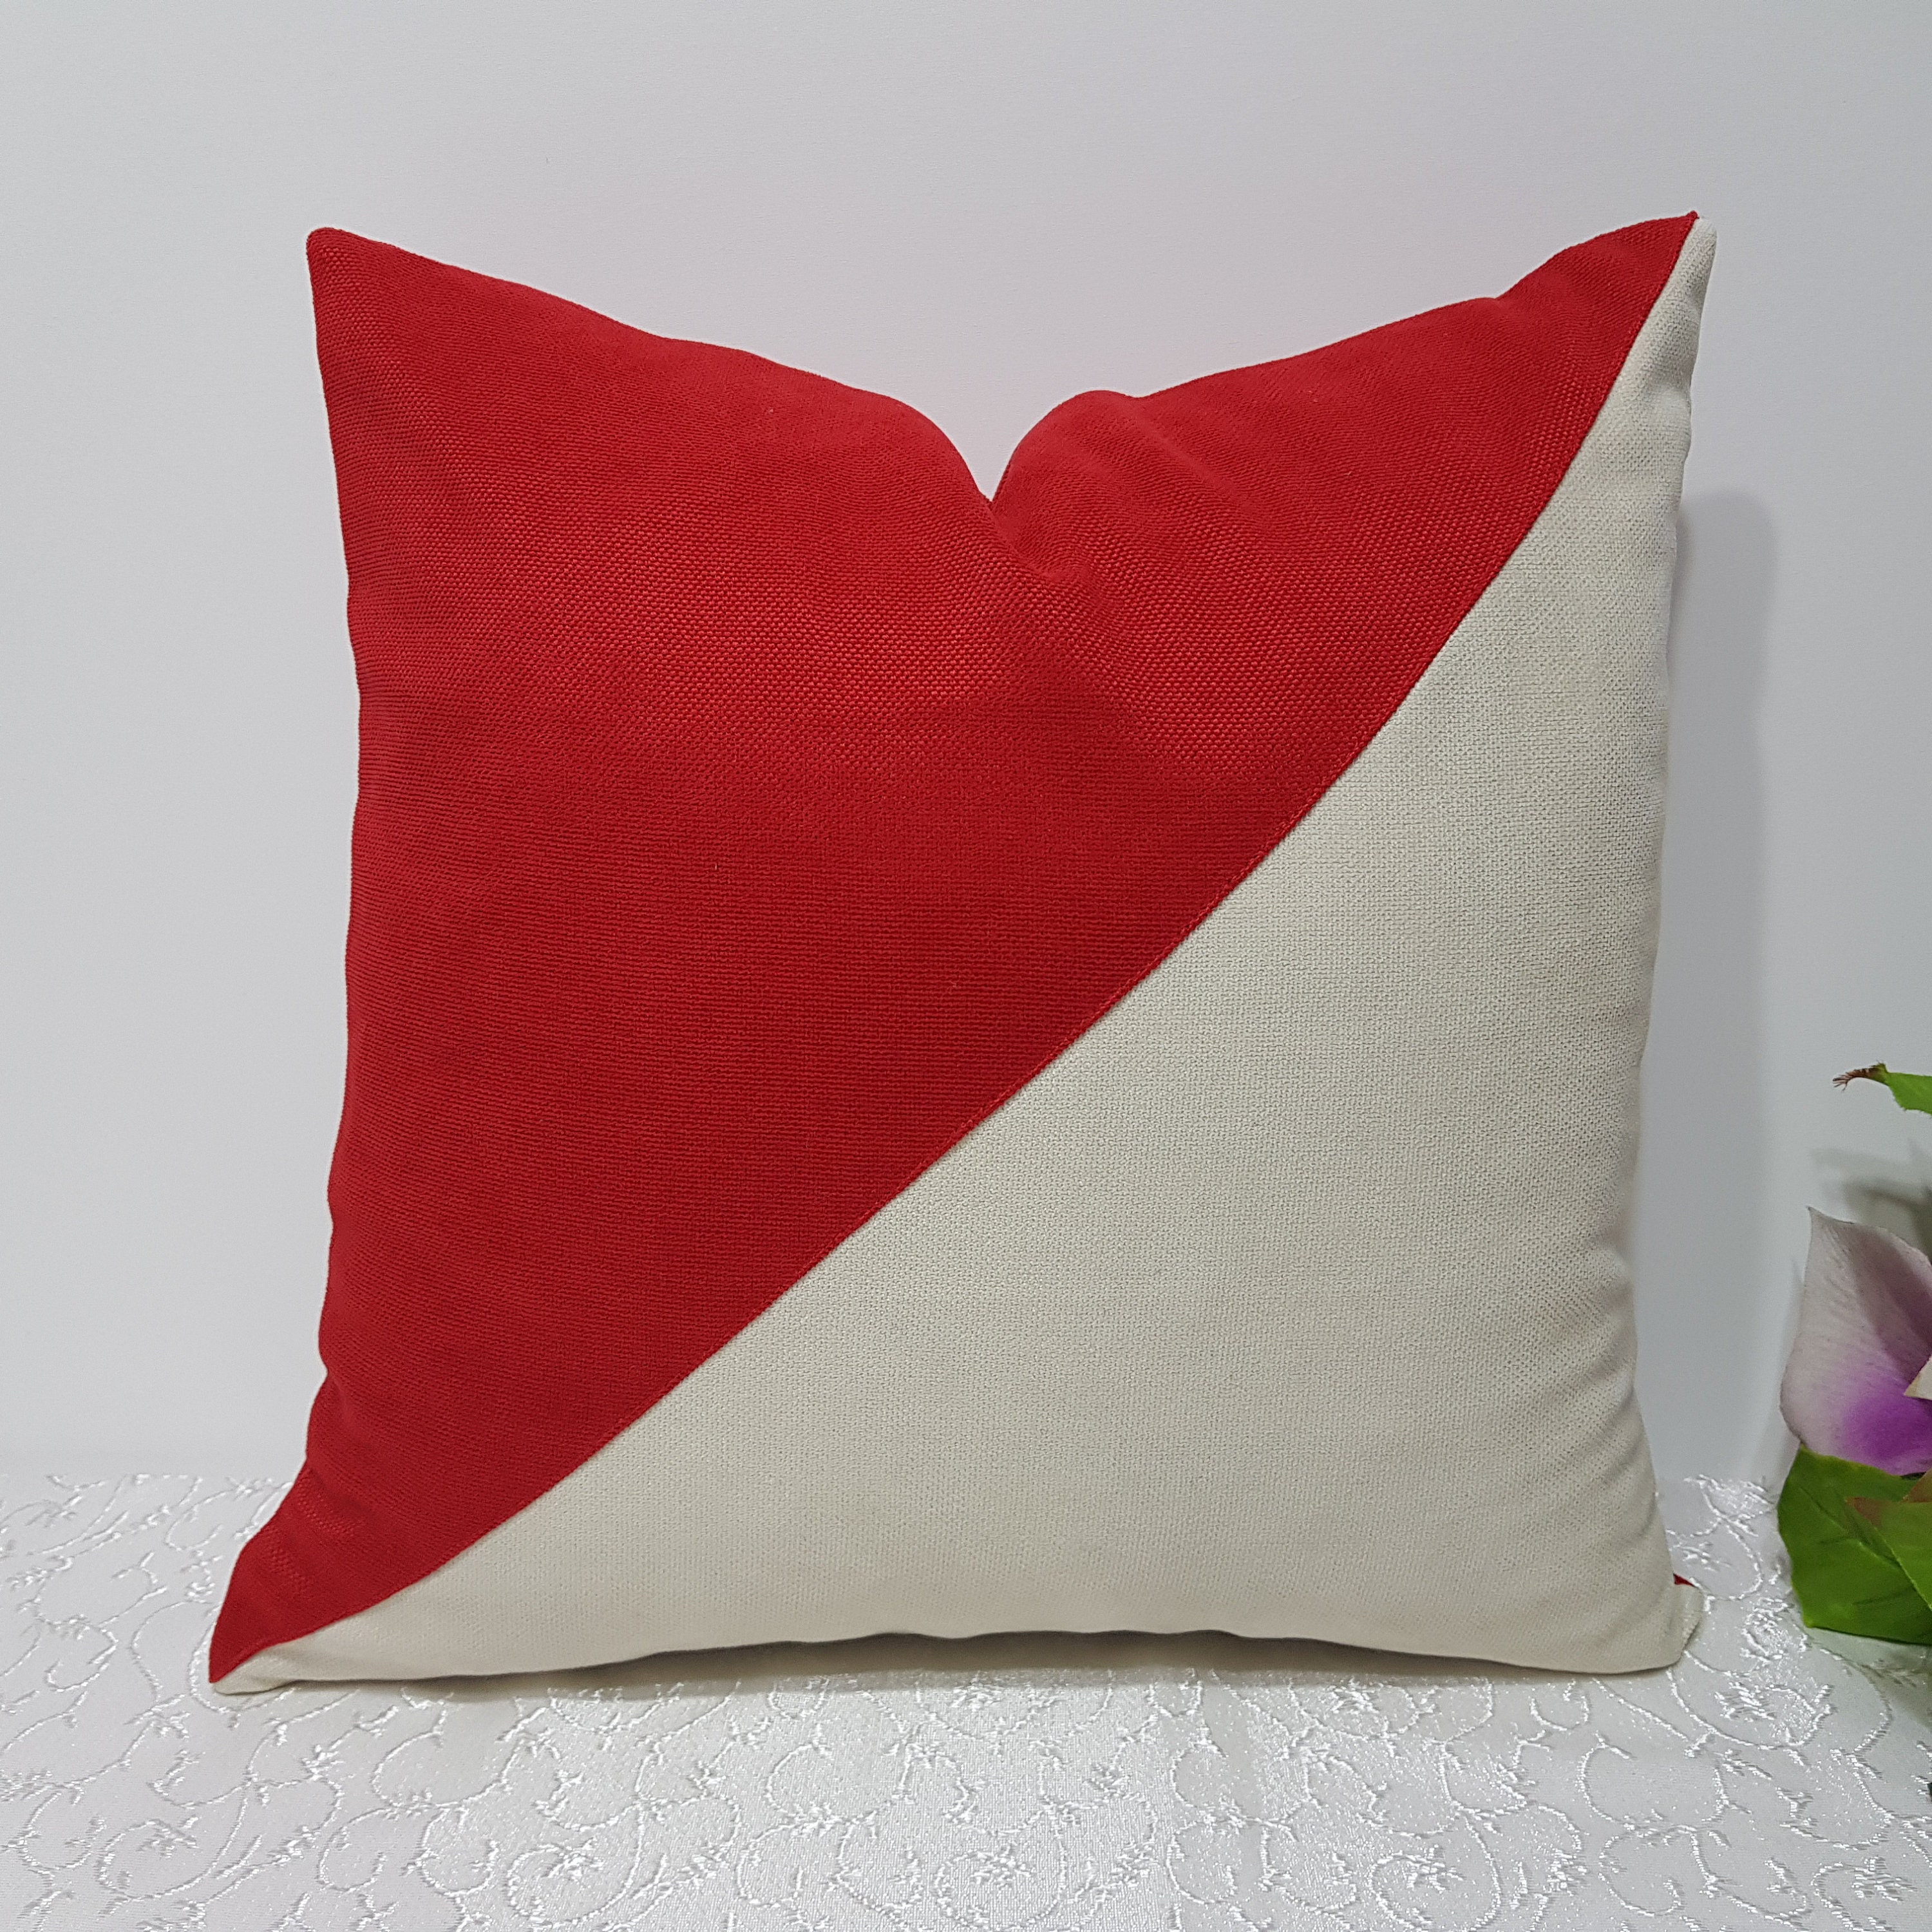 red and cream pillow cover, red throw pillow cover, modern red pillows,  christmas pillow, color block cushions, kissenbezug